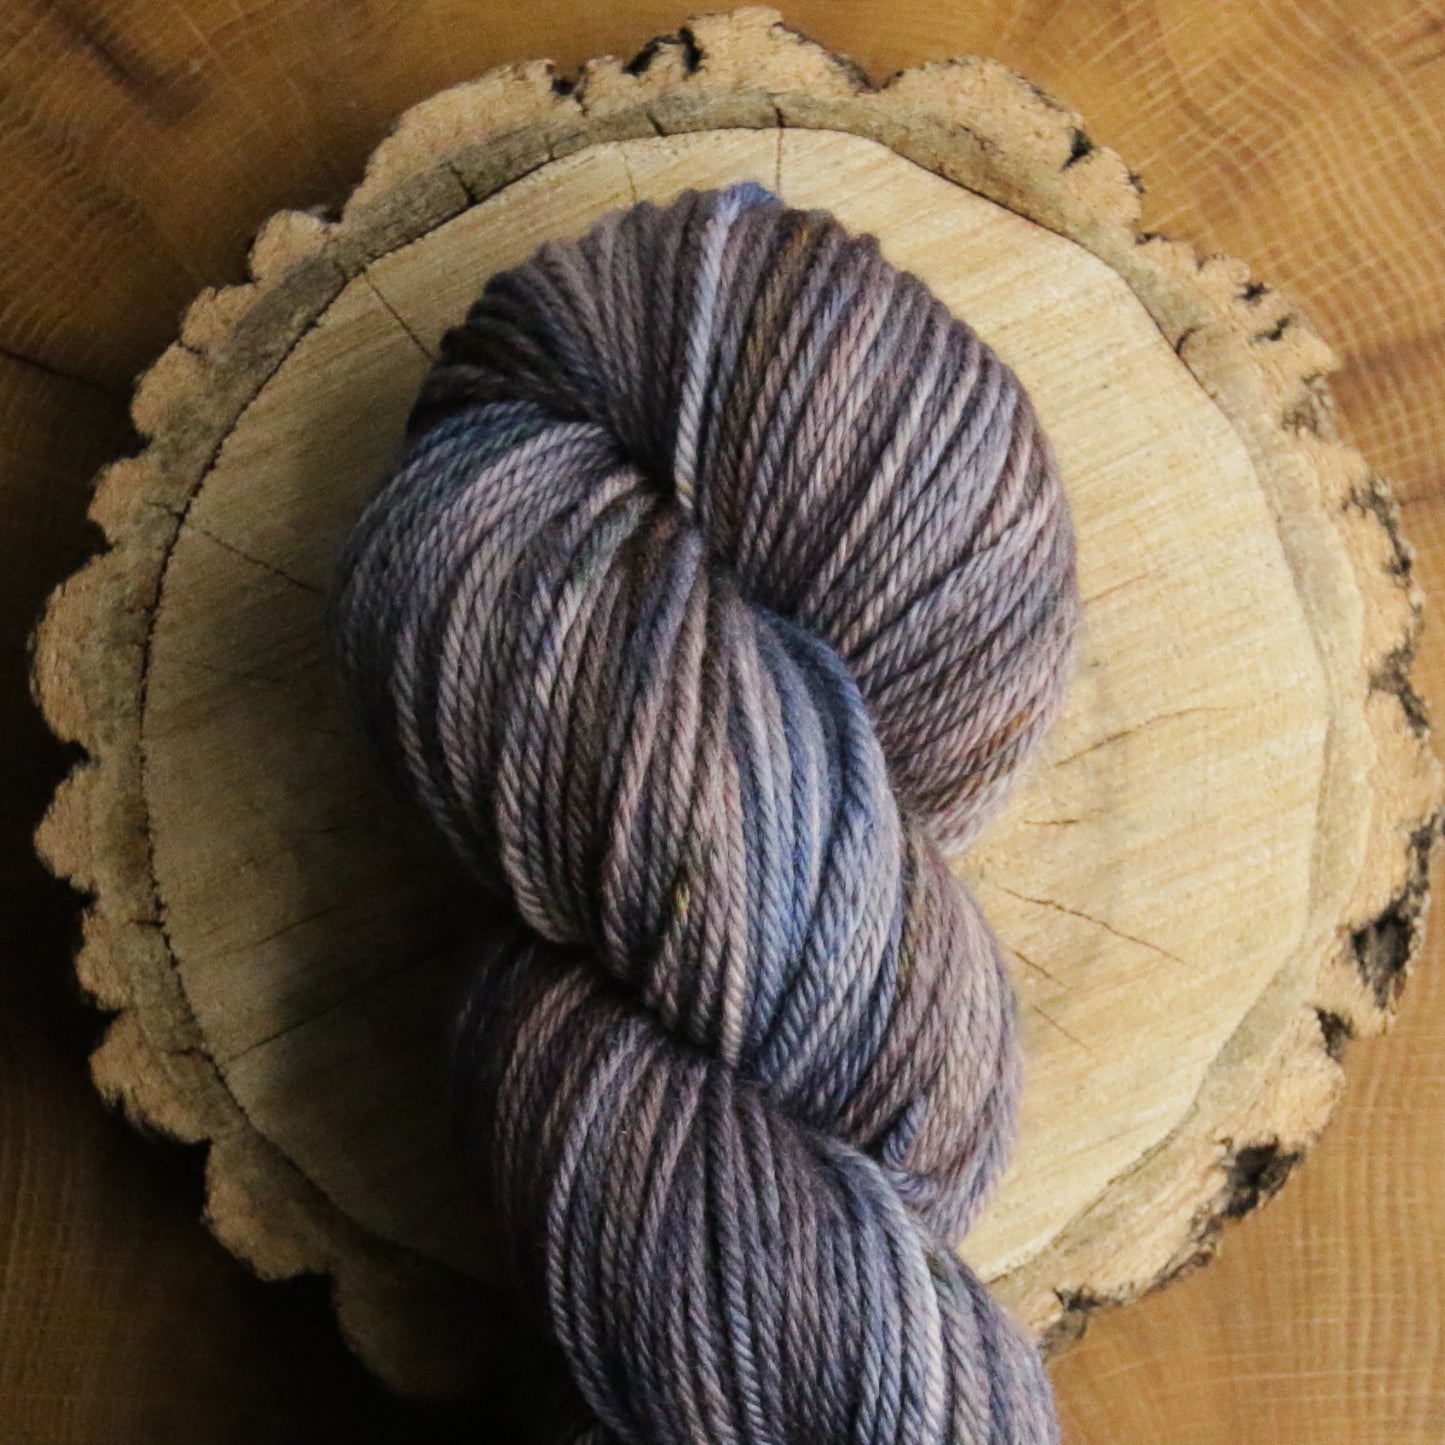 Whispering Woods - Sweater Quantity and Dyed to Order